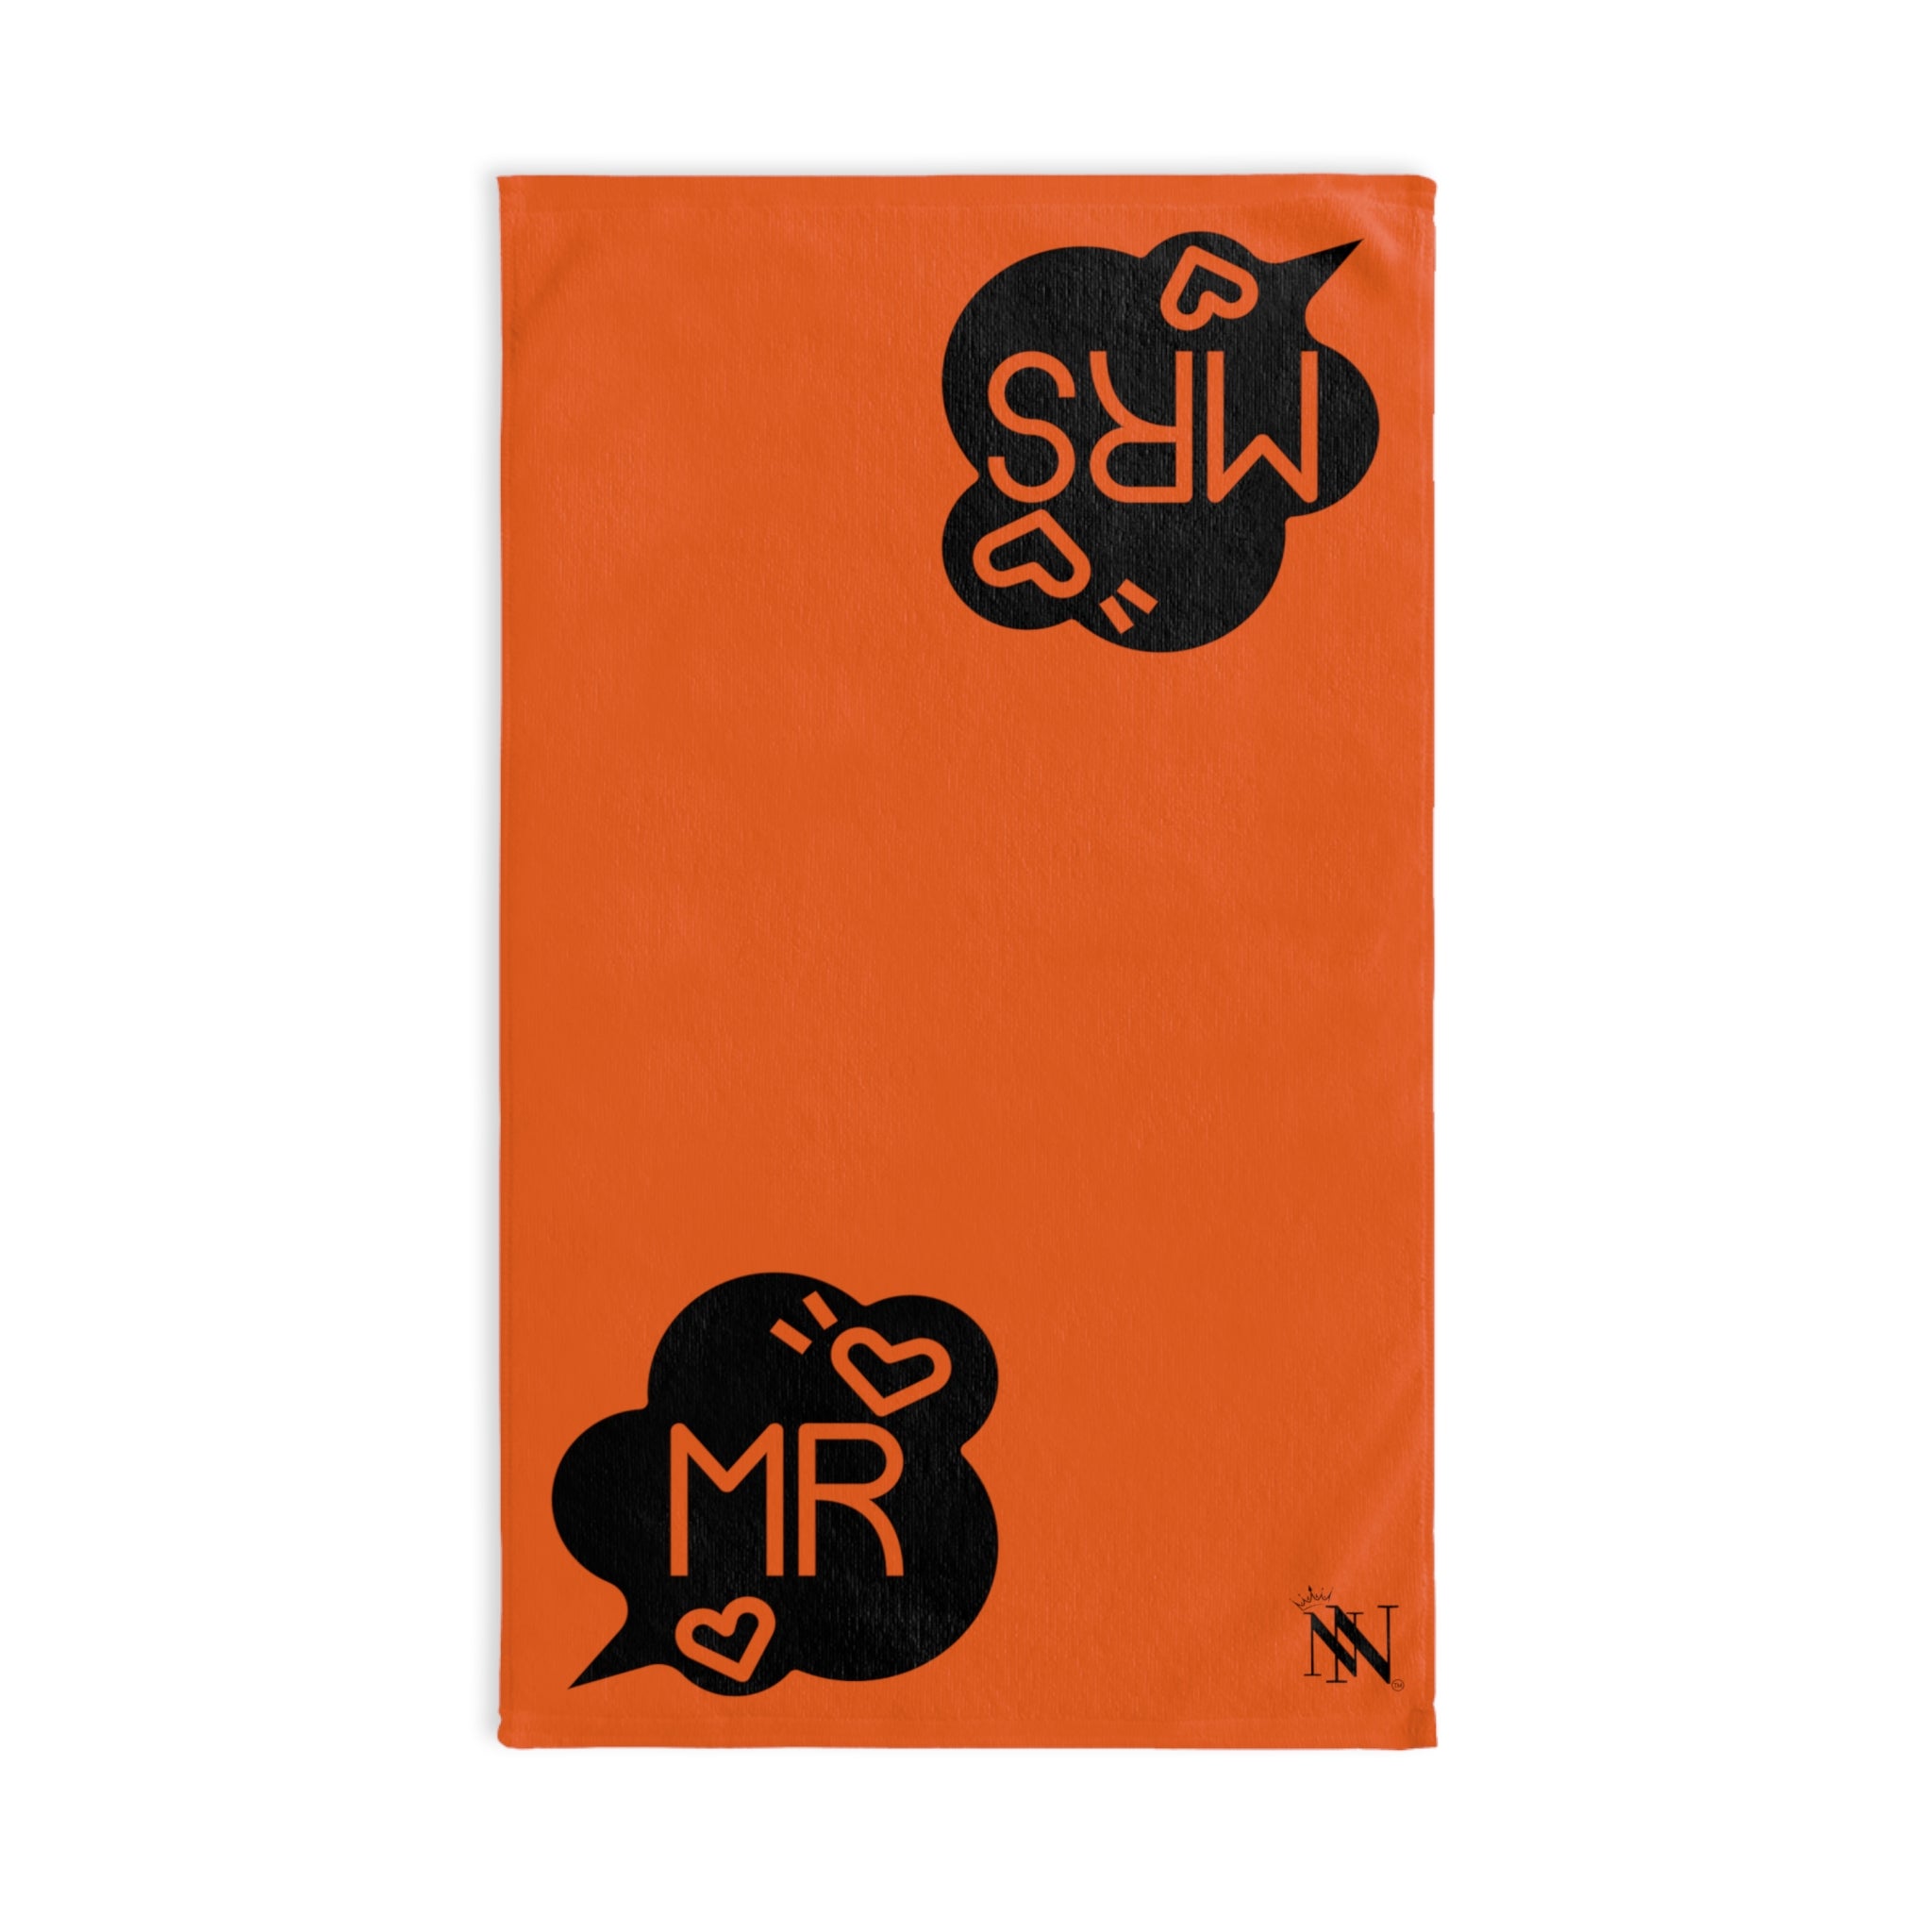 Mr Mrs Bubble Orange | Funny Gifts for Men - Gifts for Him - Birthday Gifts for Men, Him, Husband, Boyfriend, New Couple Gifts, Fathers & Valentines Day Gifts, Hand Towels NECTAR NAPKINS